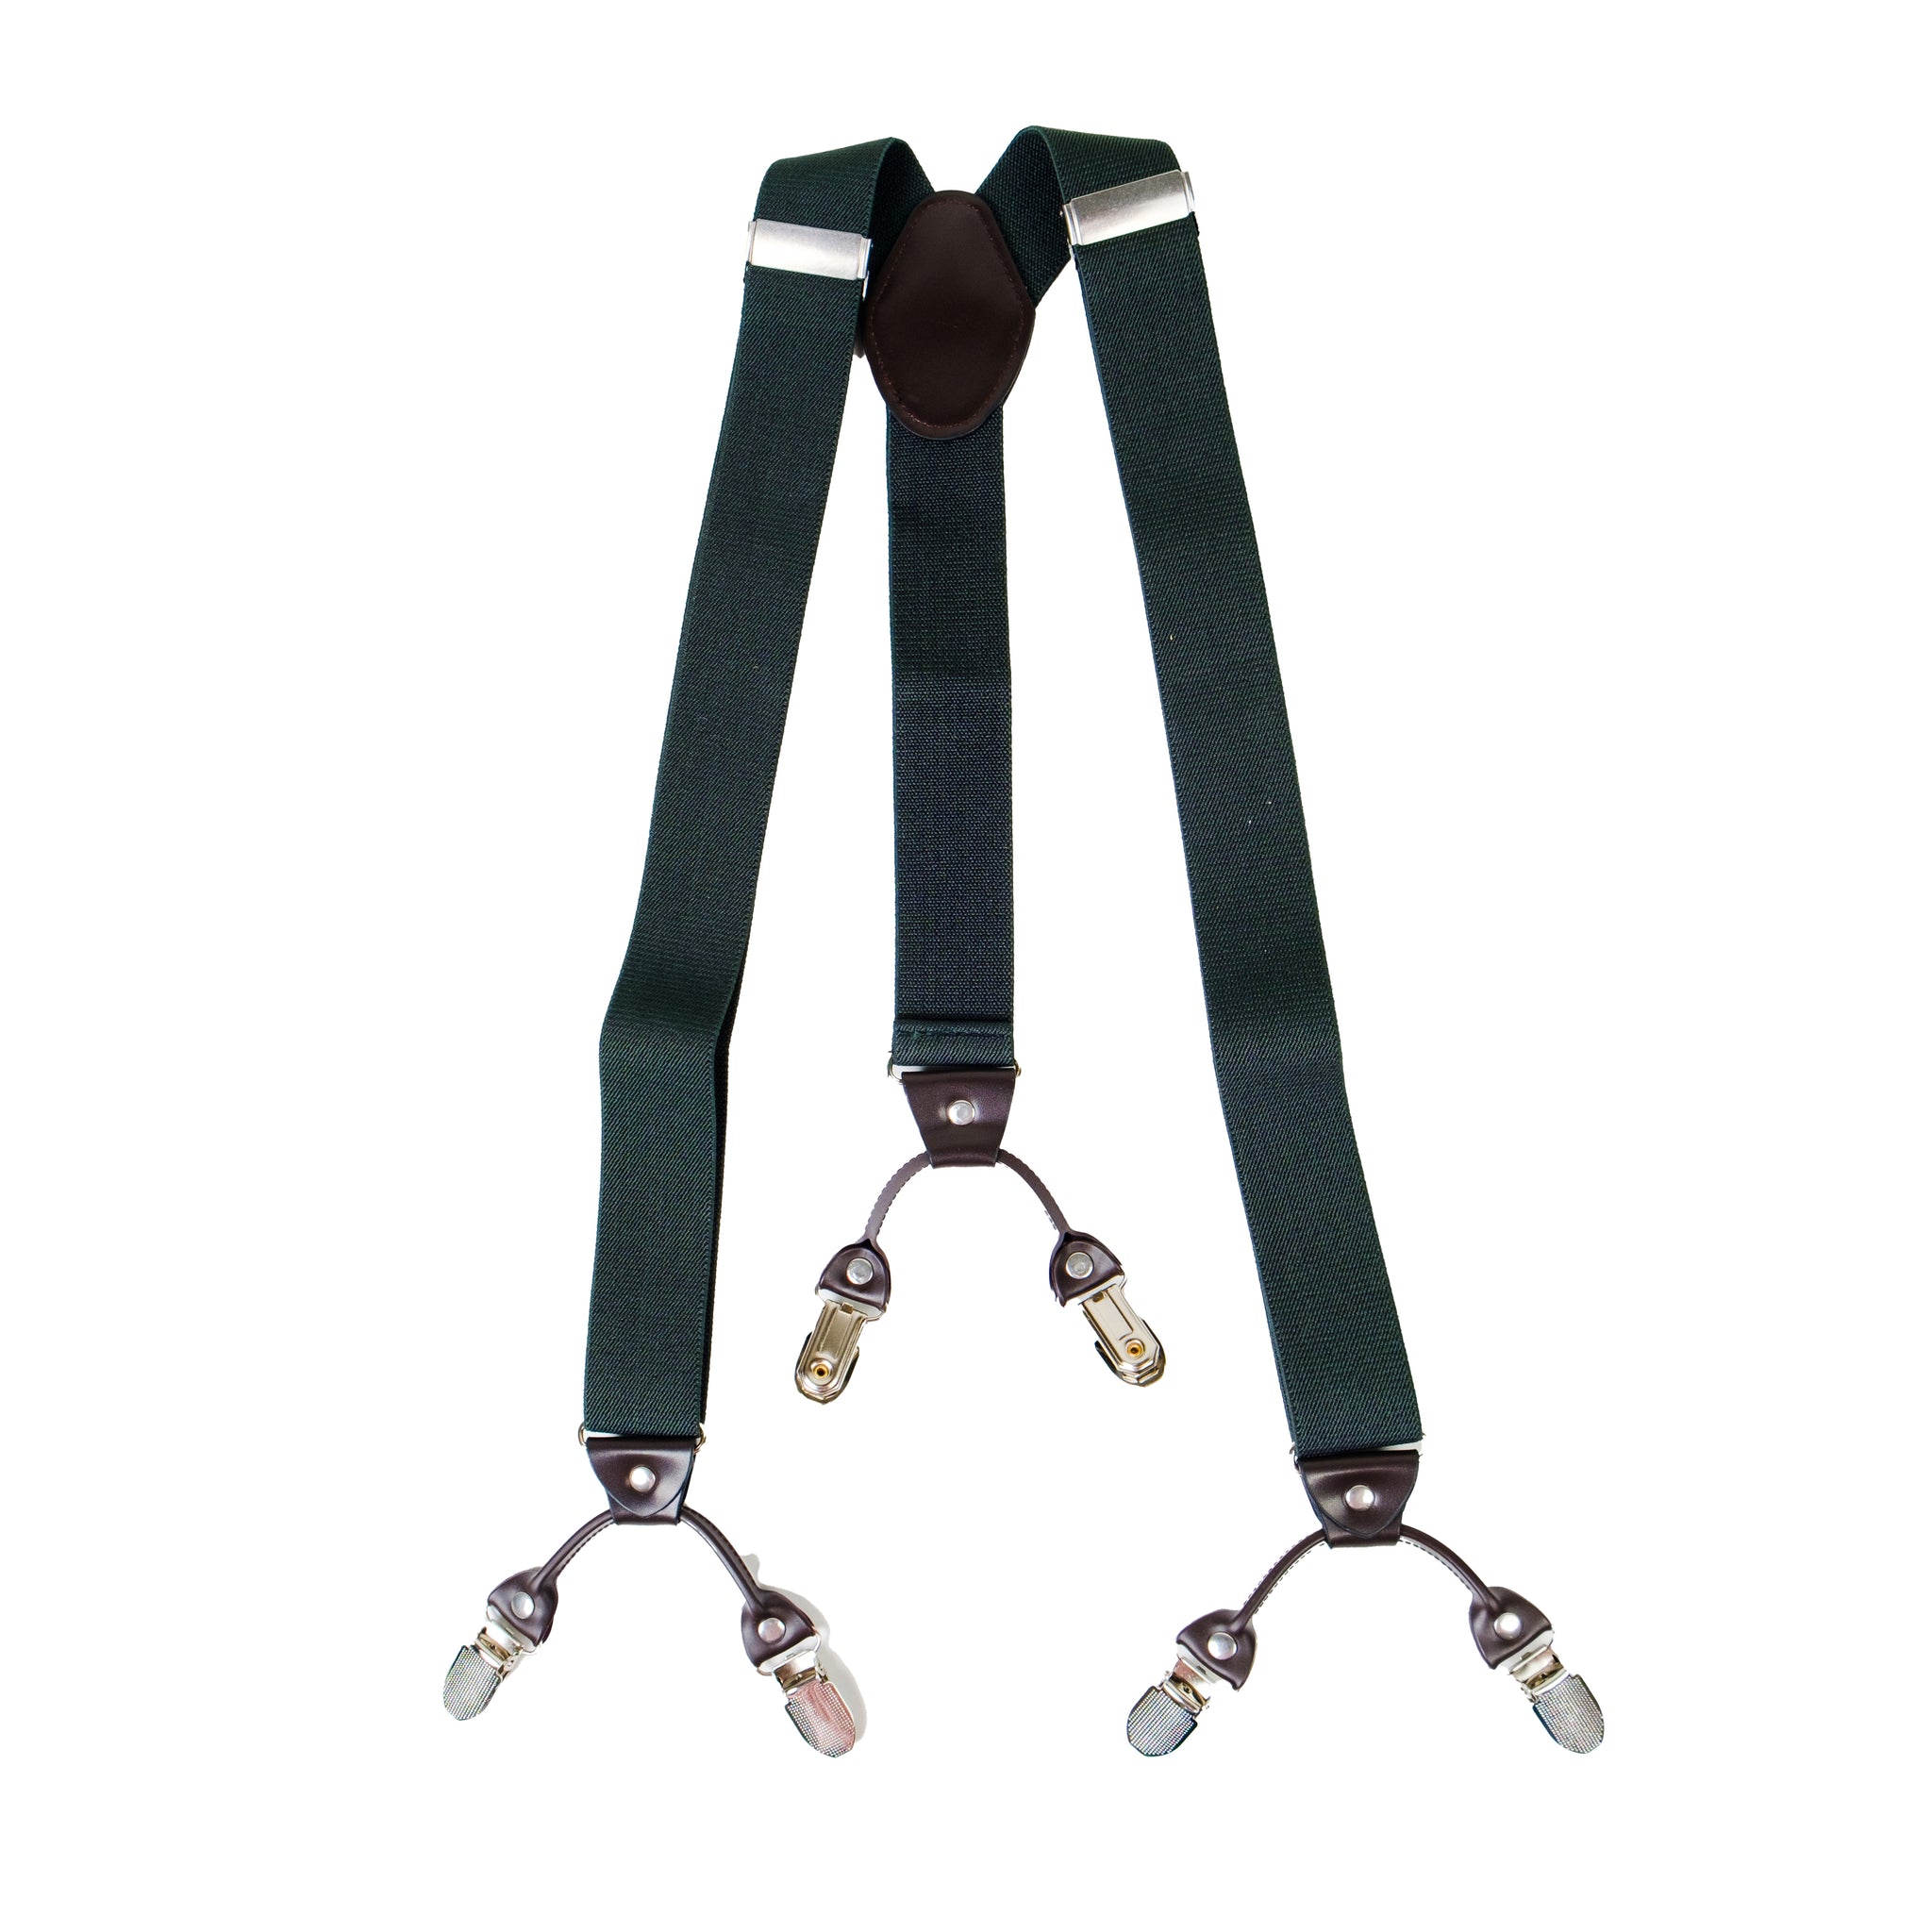 Chokore Stretchy Y-shaped Suspenders with 6-clips (Forest Green)